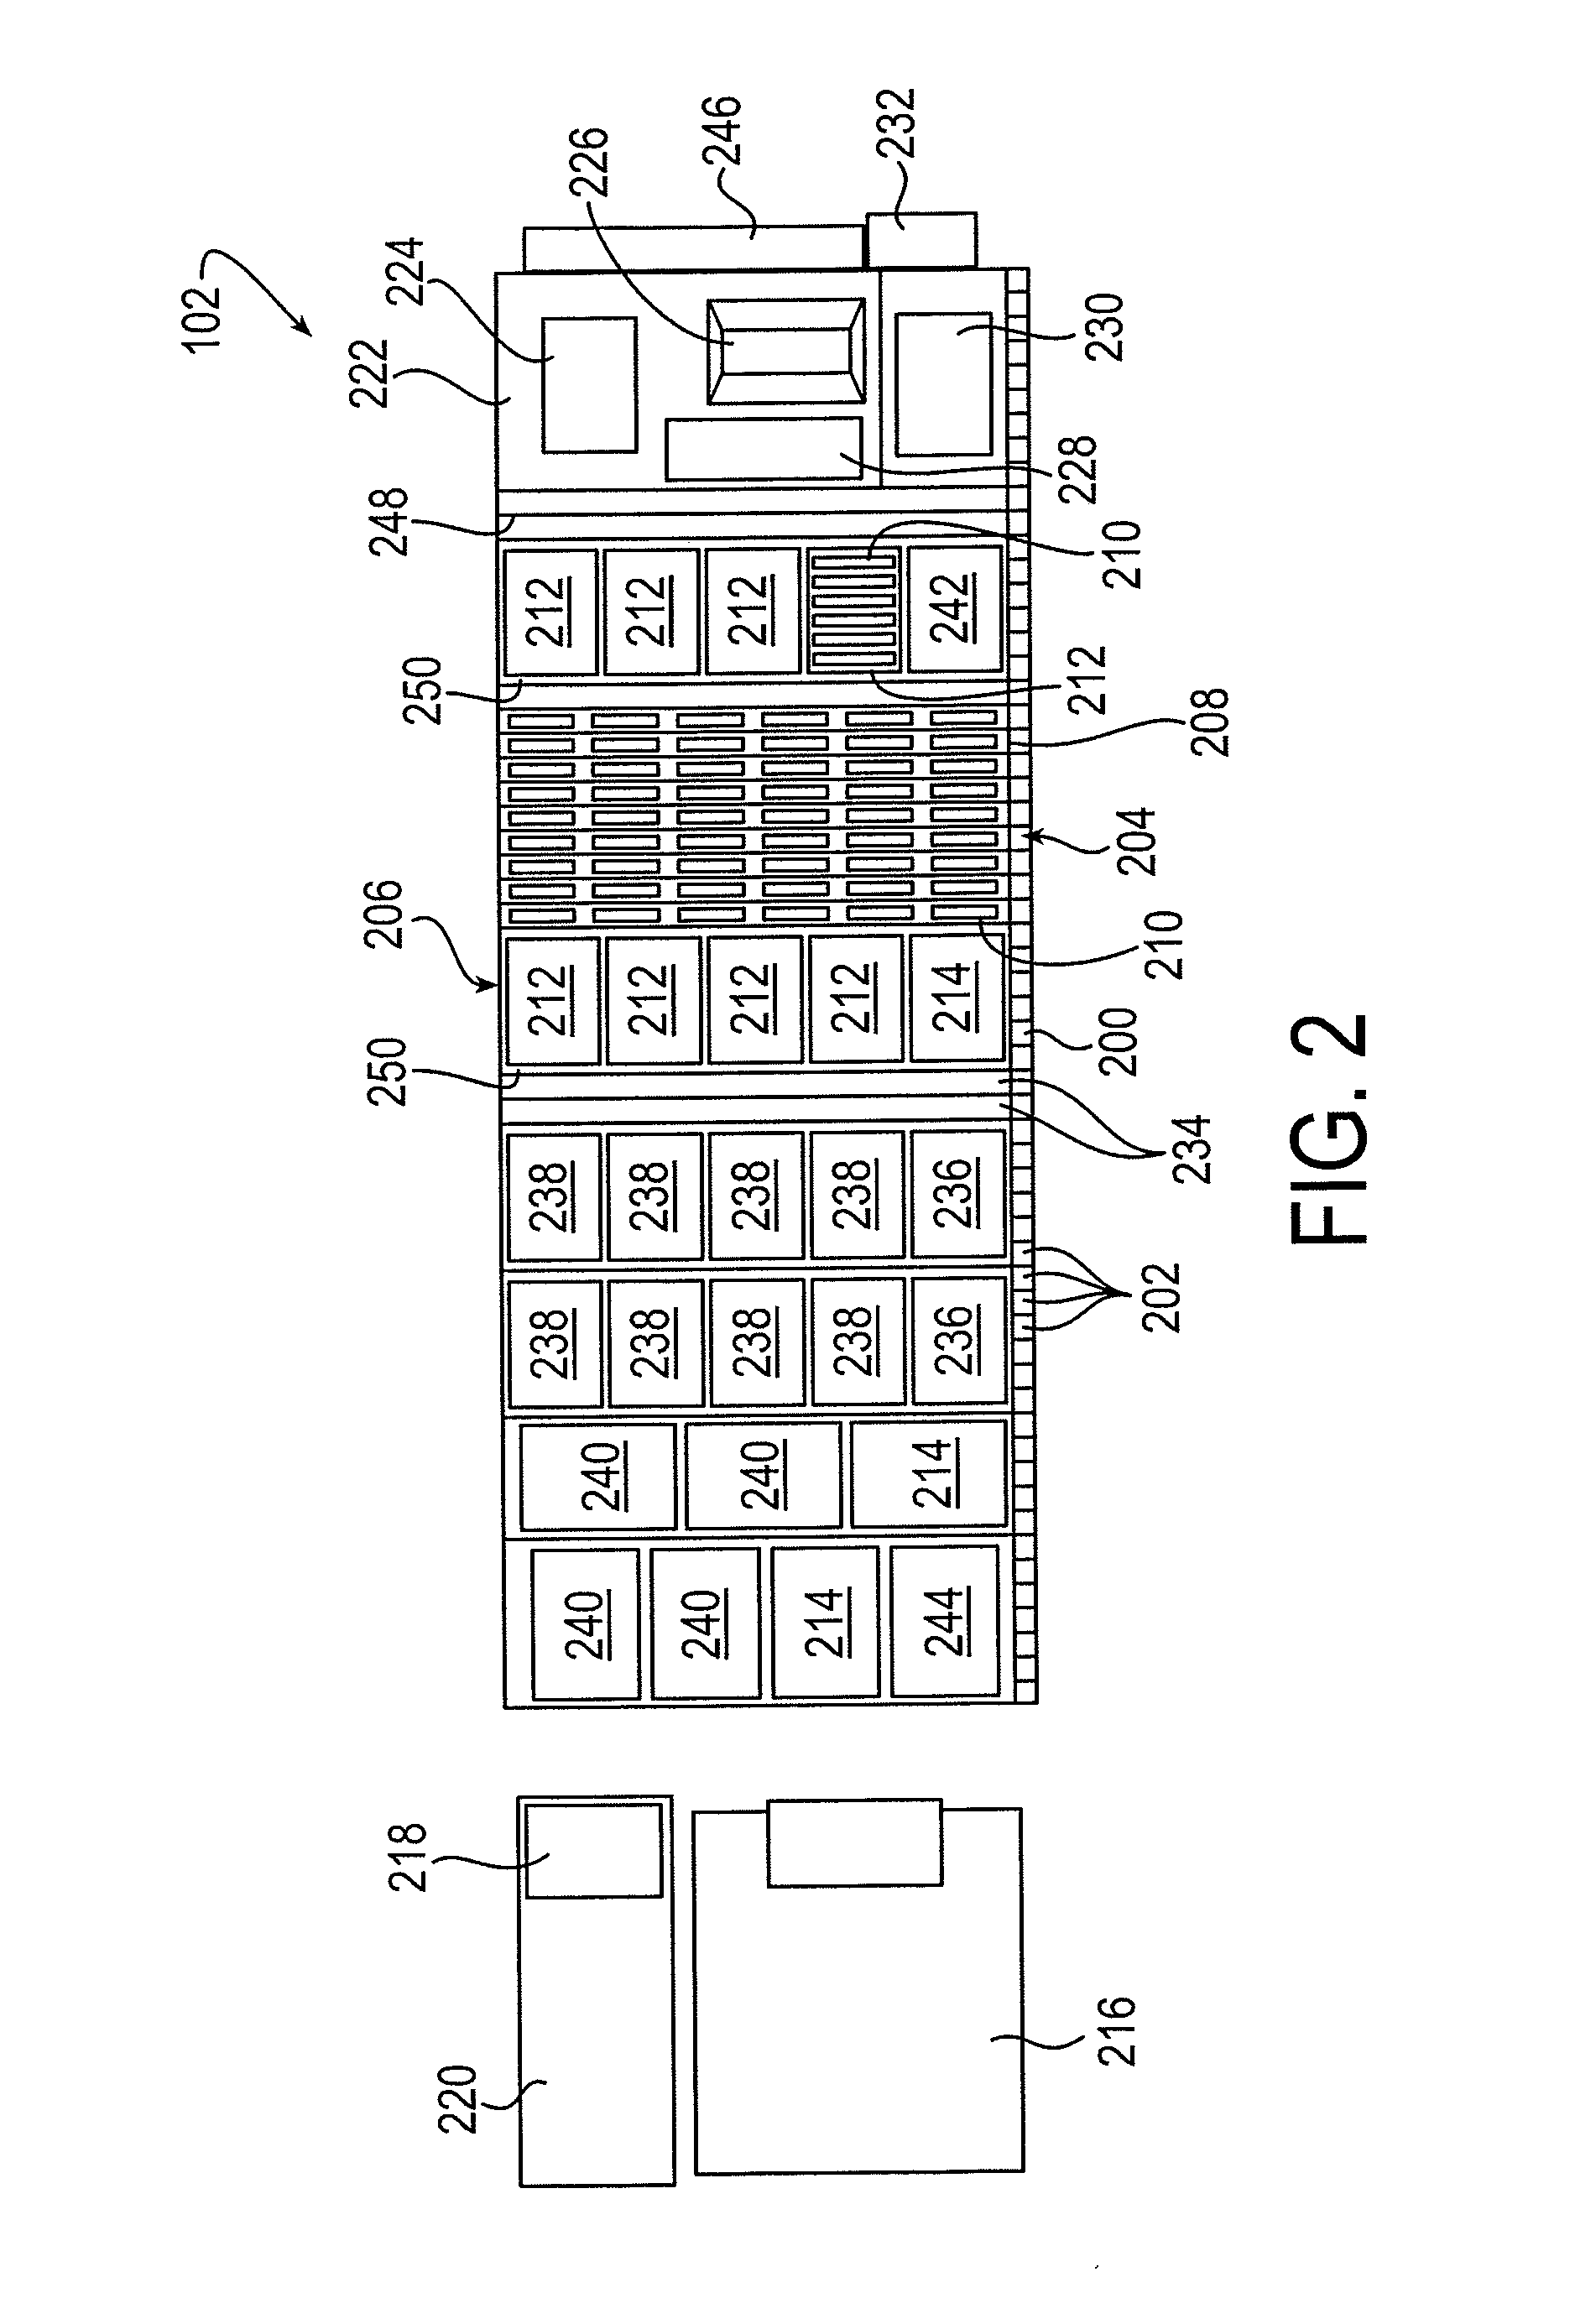 Automated pelletized sample vision inspection apparatus and methods